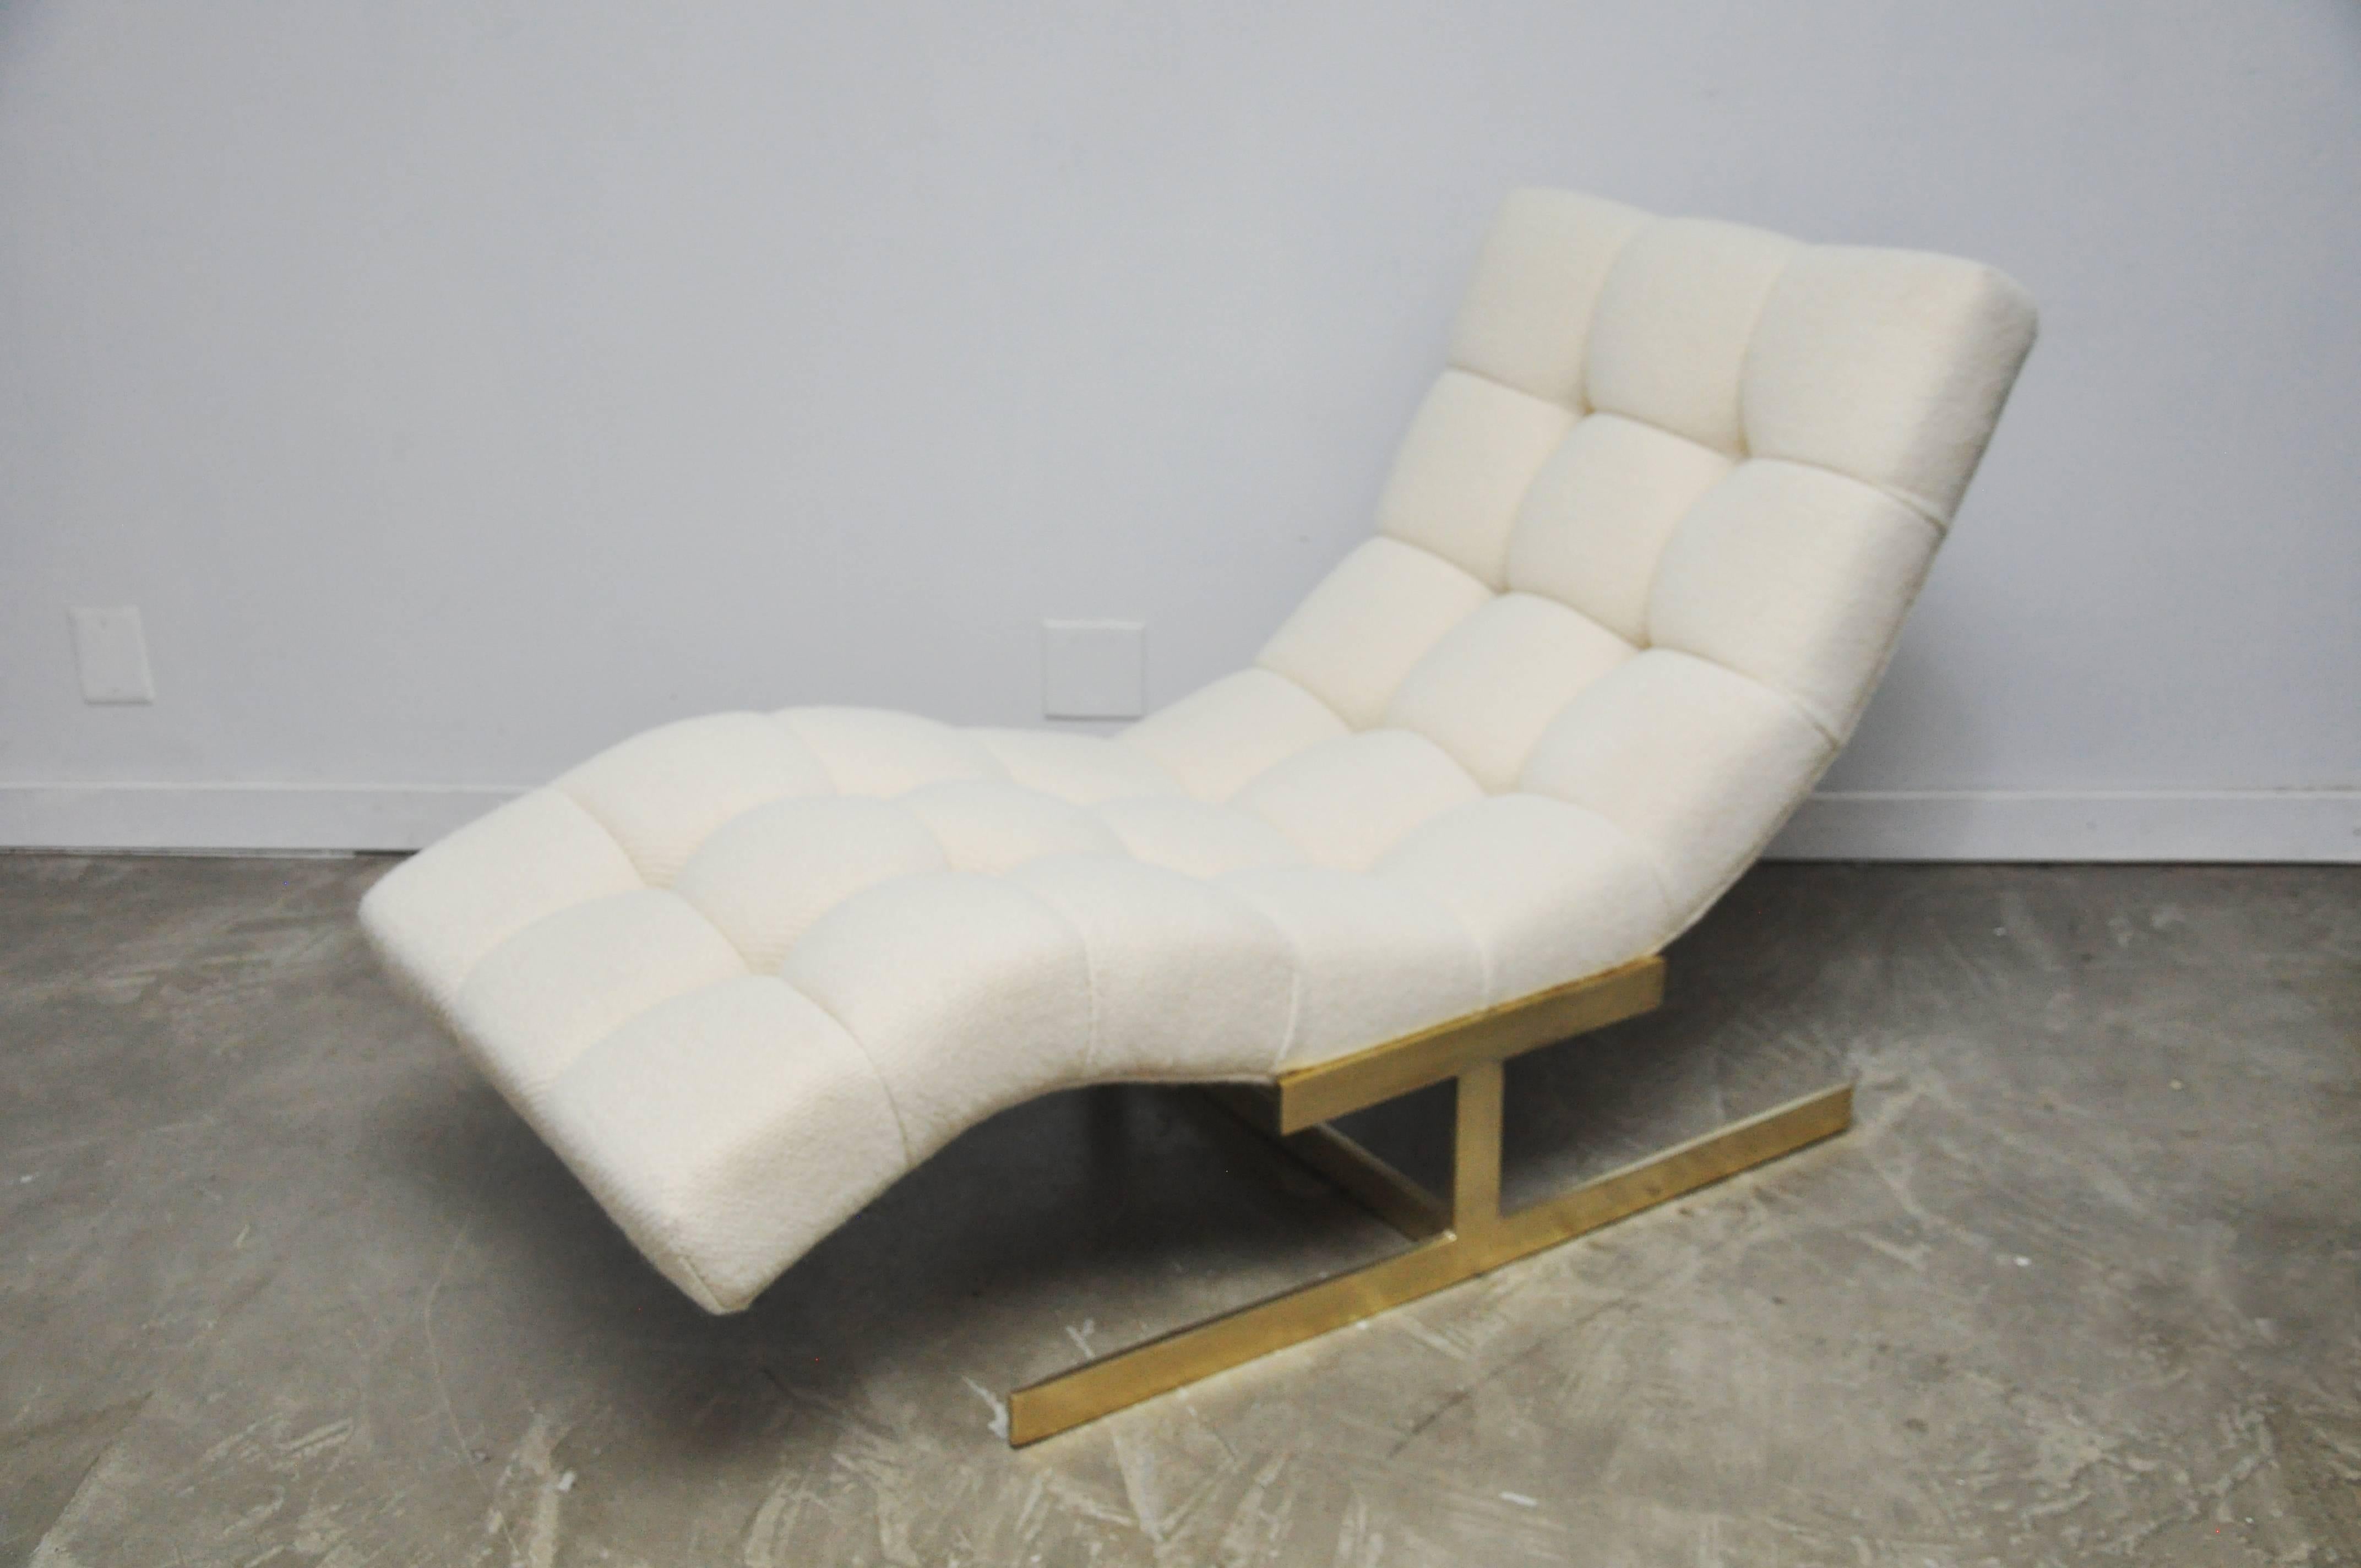 Wave chaise on brass base. Fully restored in beautiful fabric, which is nicely complimented by the polished brass base.